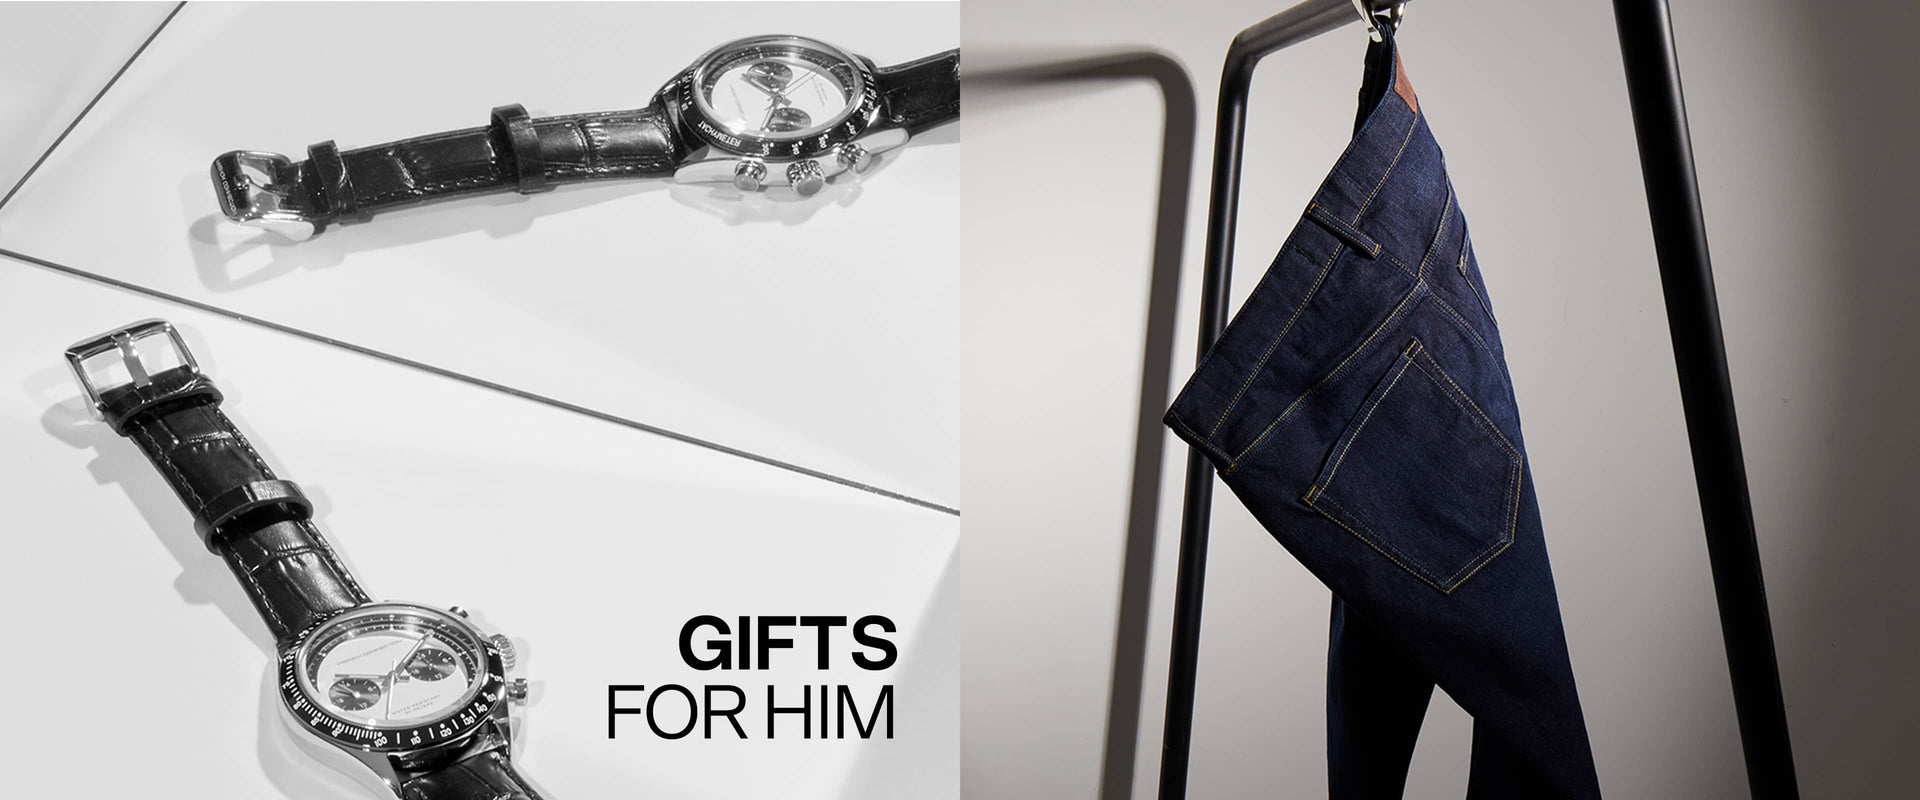 shop men's gifting - gifts for him